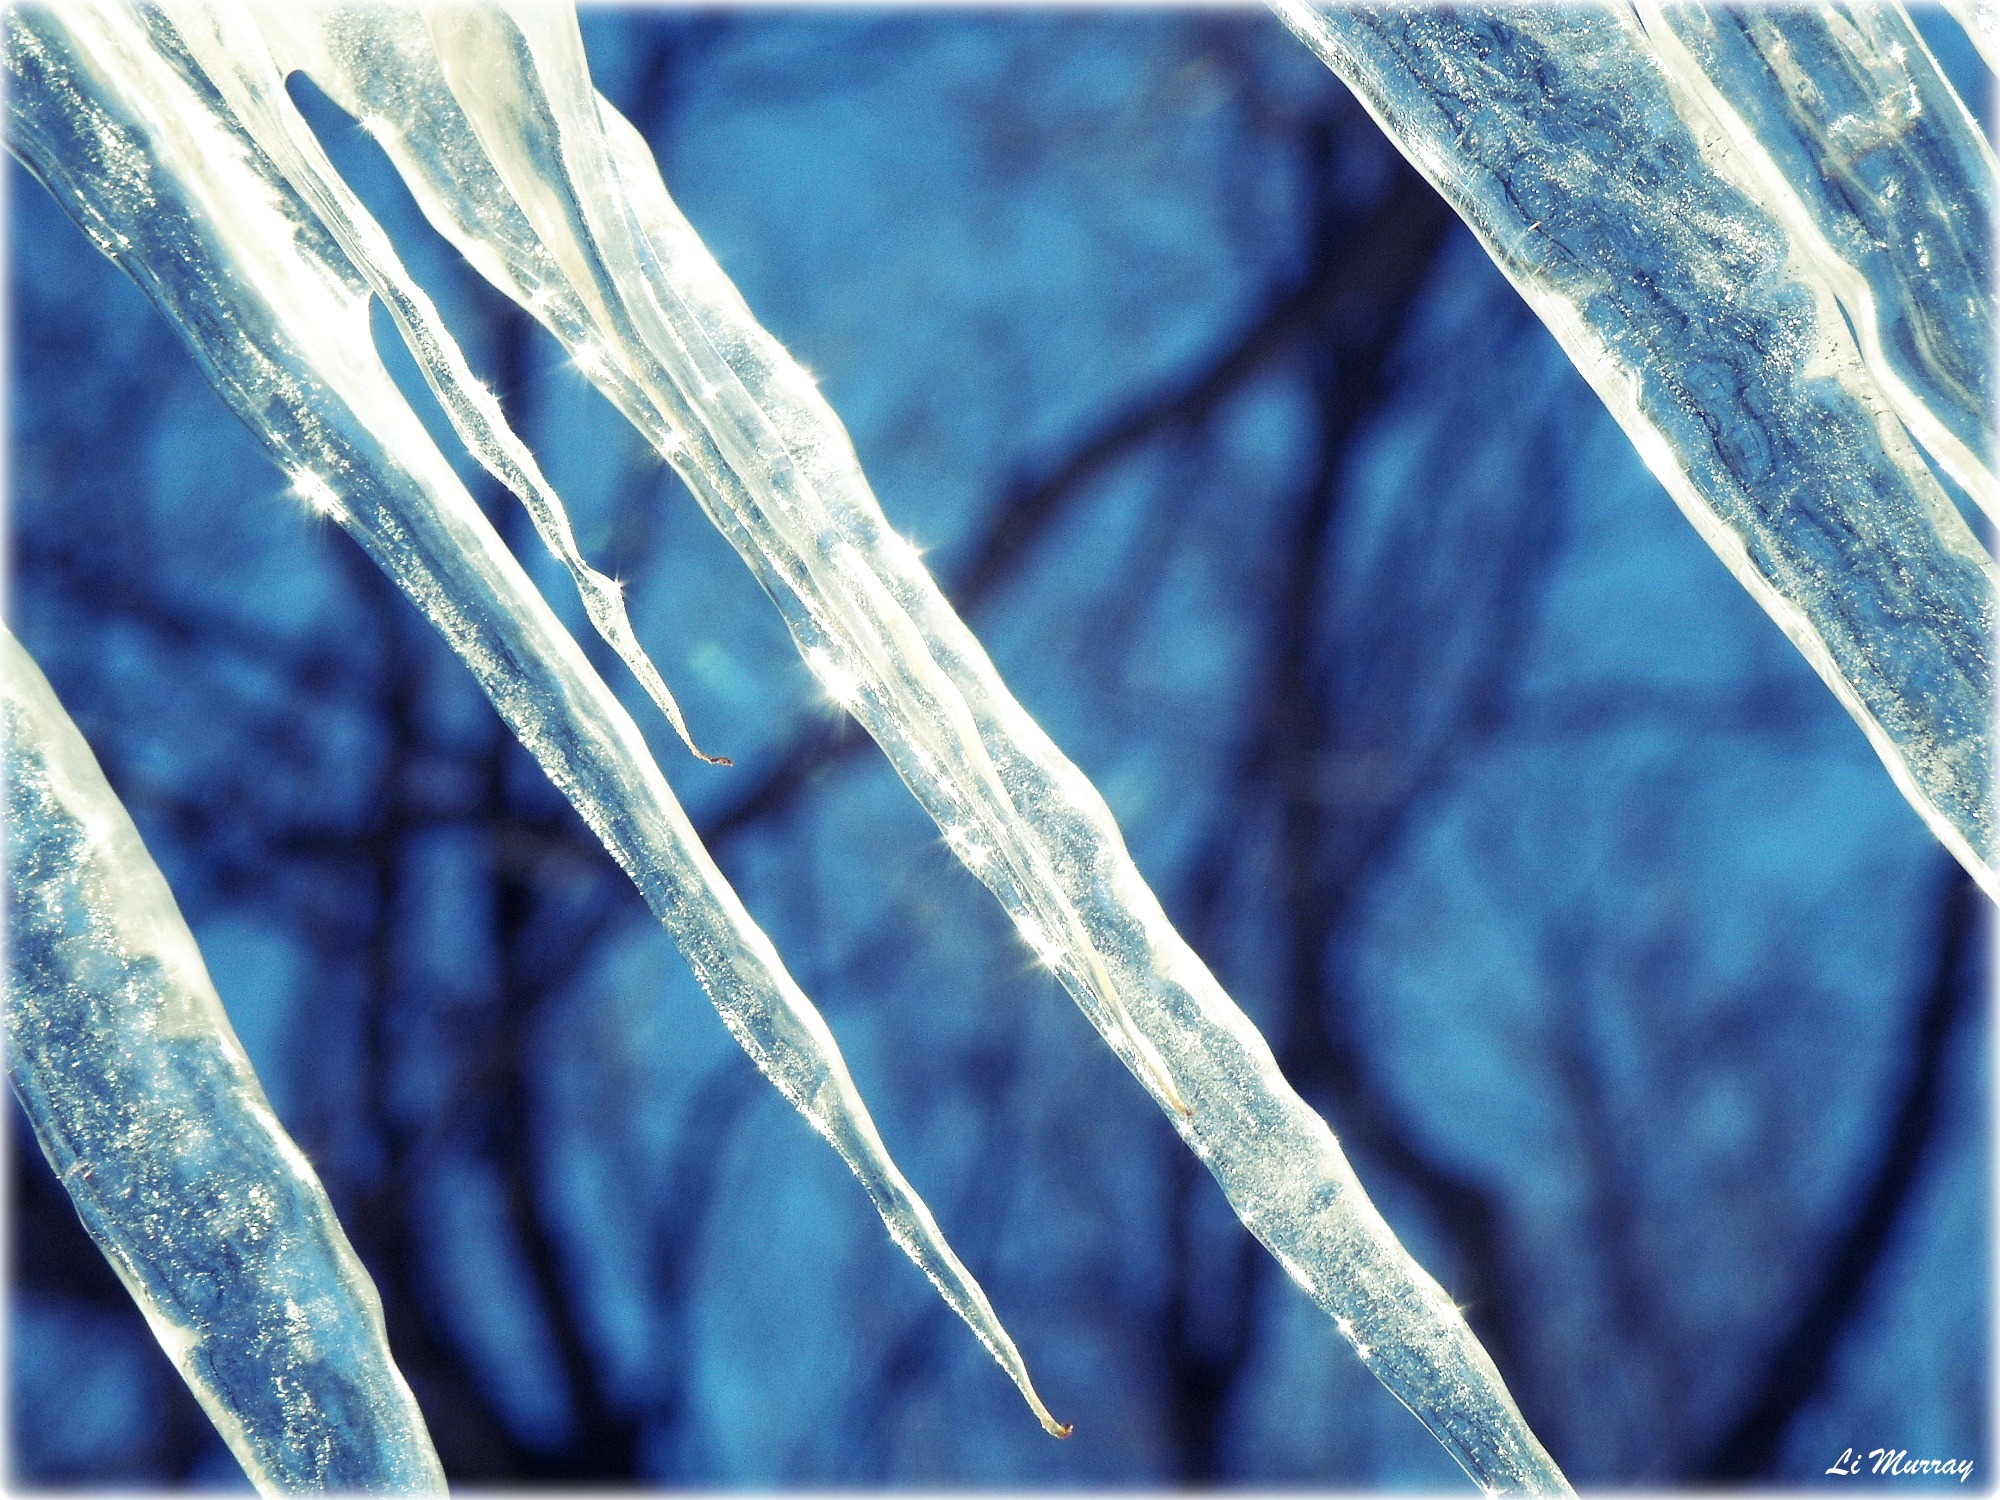 Icicles (user submitted)